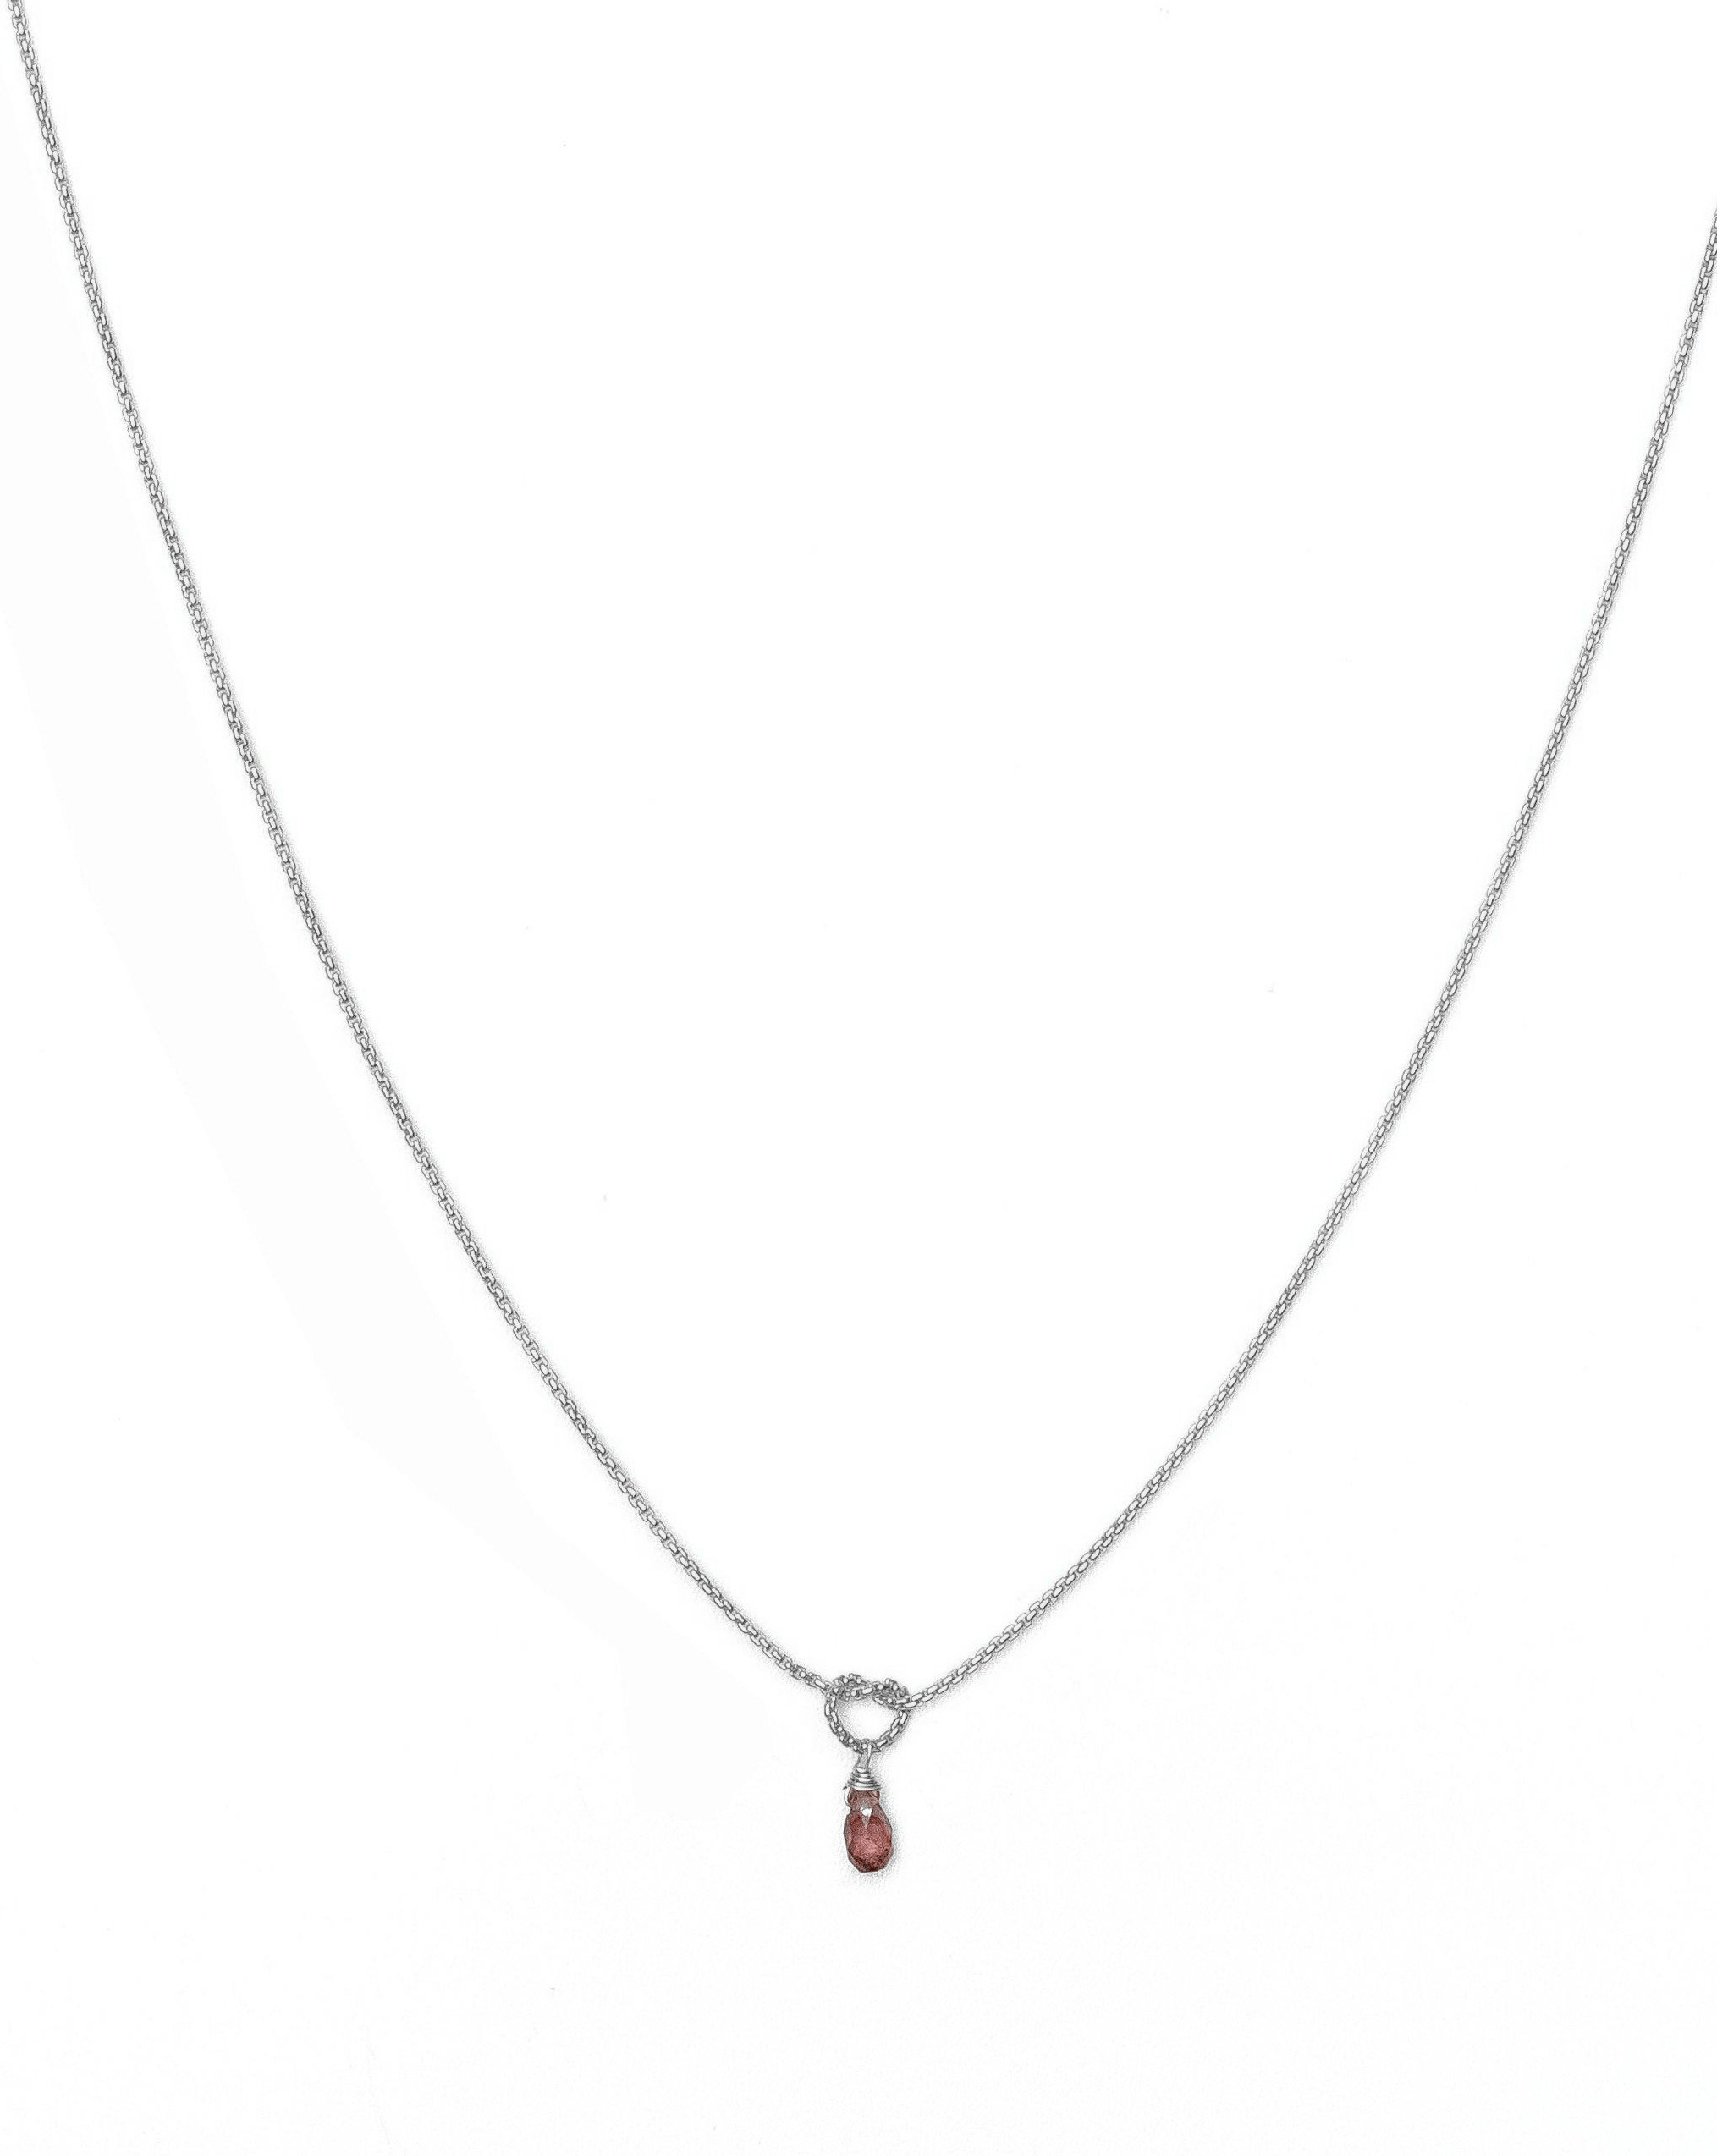 Love Knot Necklace by KOZAKH. A 16 to 18 inch adjustable length necklace, crafted in Sterling Silver, featuring a knot and a faceted Burgundy Sapphire droplet.